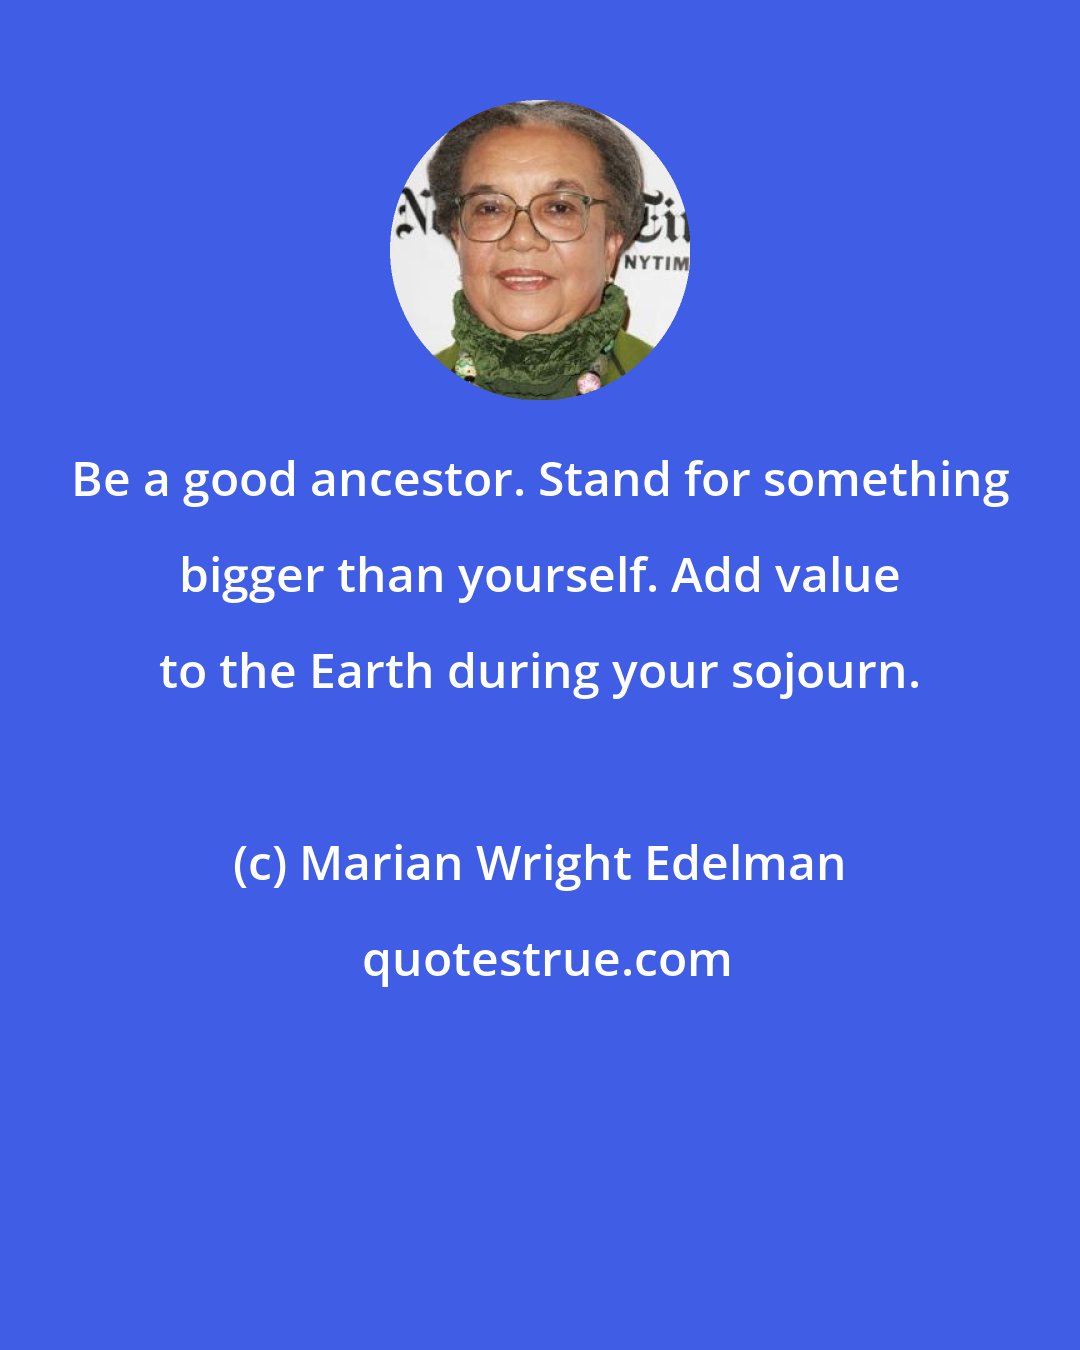 Marian Wright Edelman: Be a good ancestor. Stand for something bigger than yourself. Add value to the Earth during your sojourn.